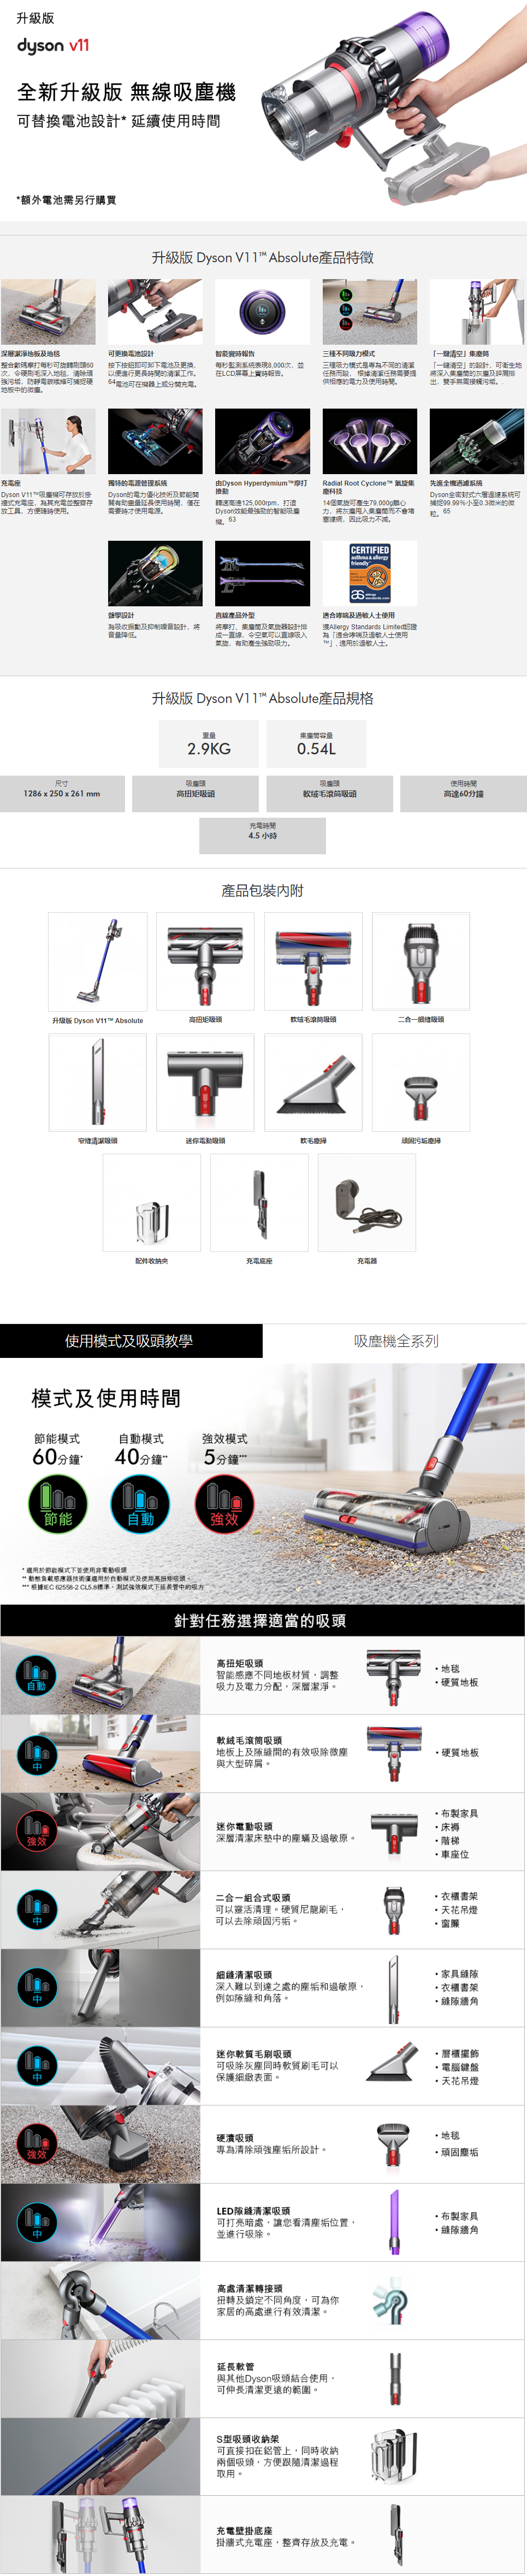 【Discontinued】Dyson V11 Absolute Upgrade version Cordless Vacuum Cleaner